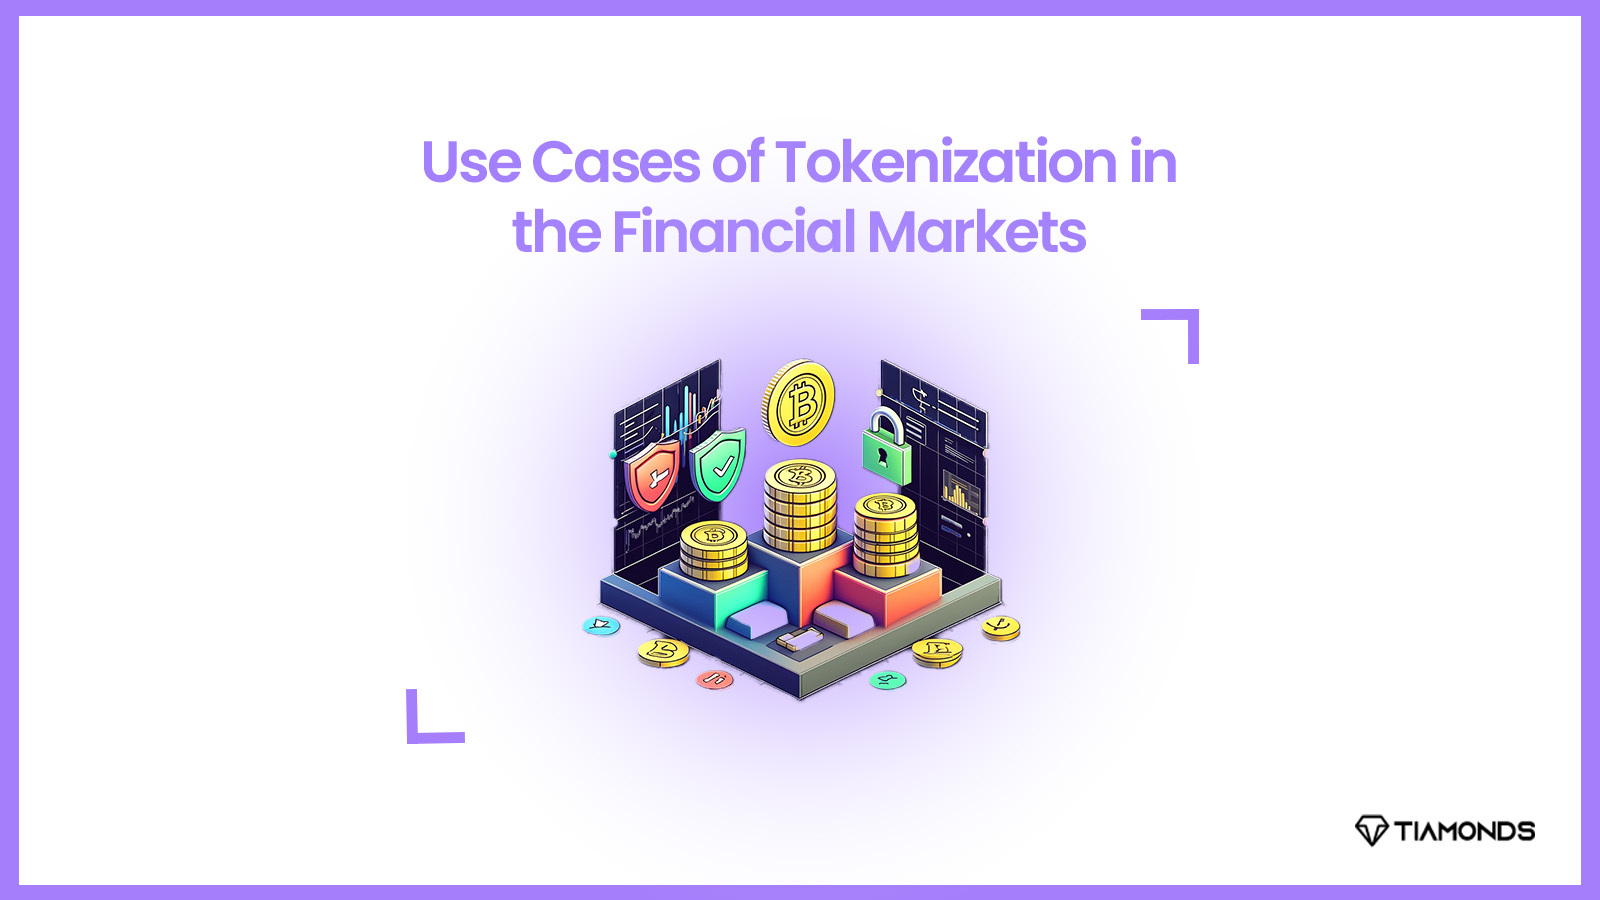 Use Cases of Tokenization in the Financial Markets